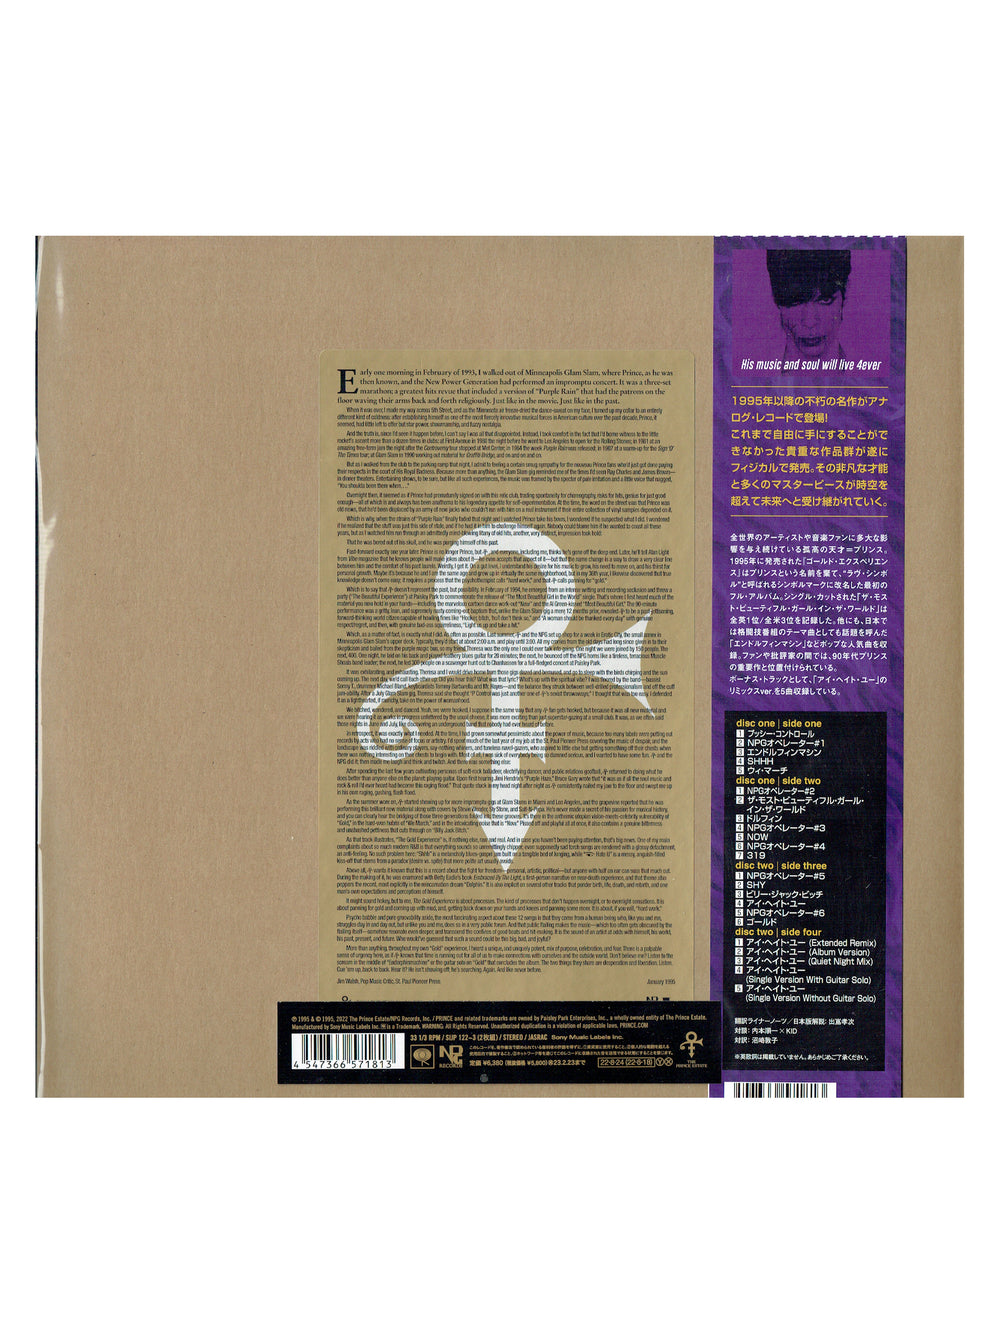 Prince – O(+> The Gold Experience GOLD Vinyl Double Album Brand New Sealed JAPAN OBI PRE ORDER